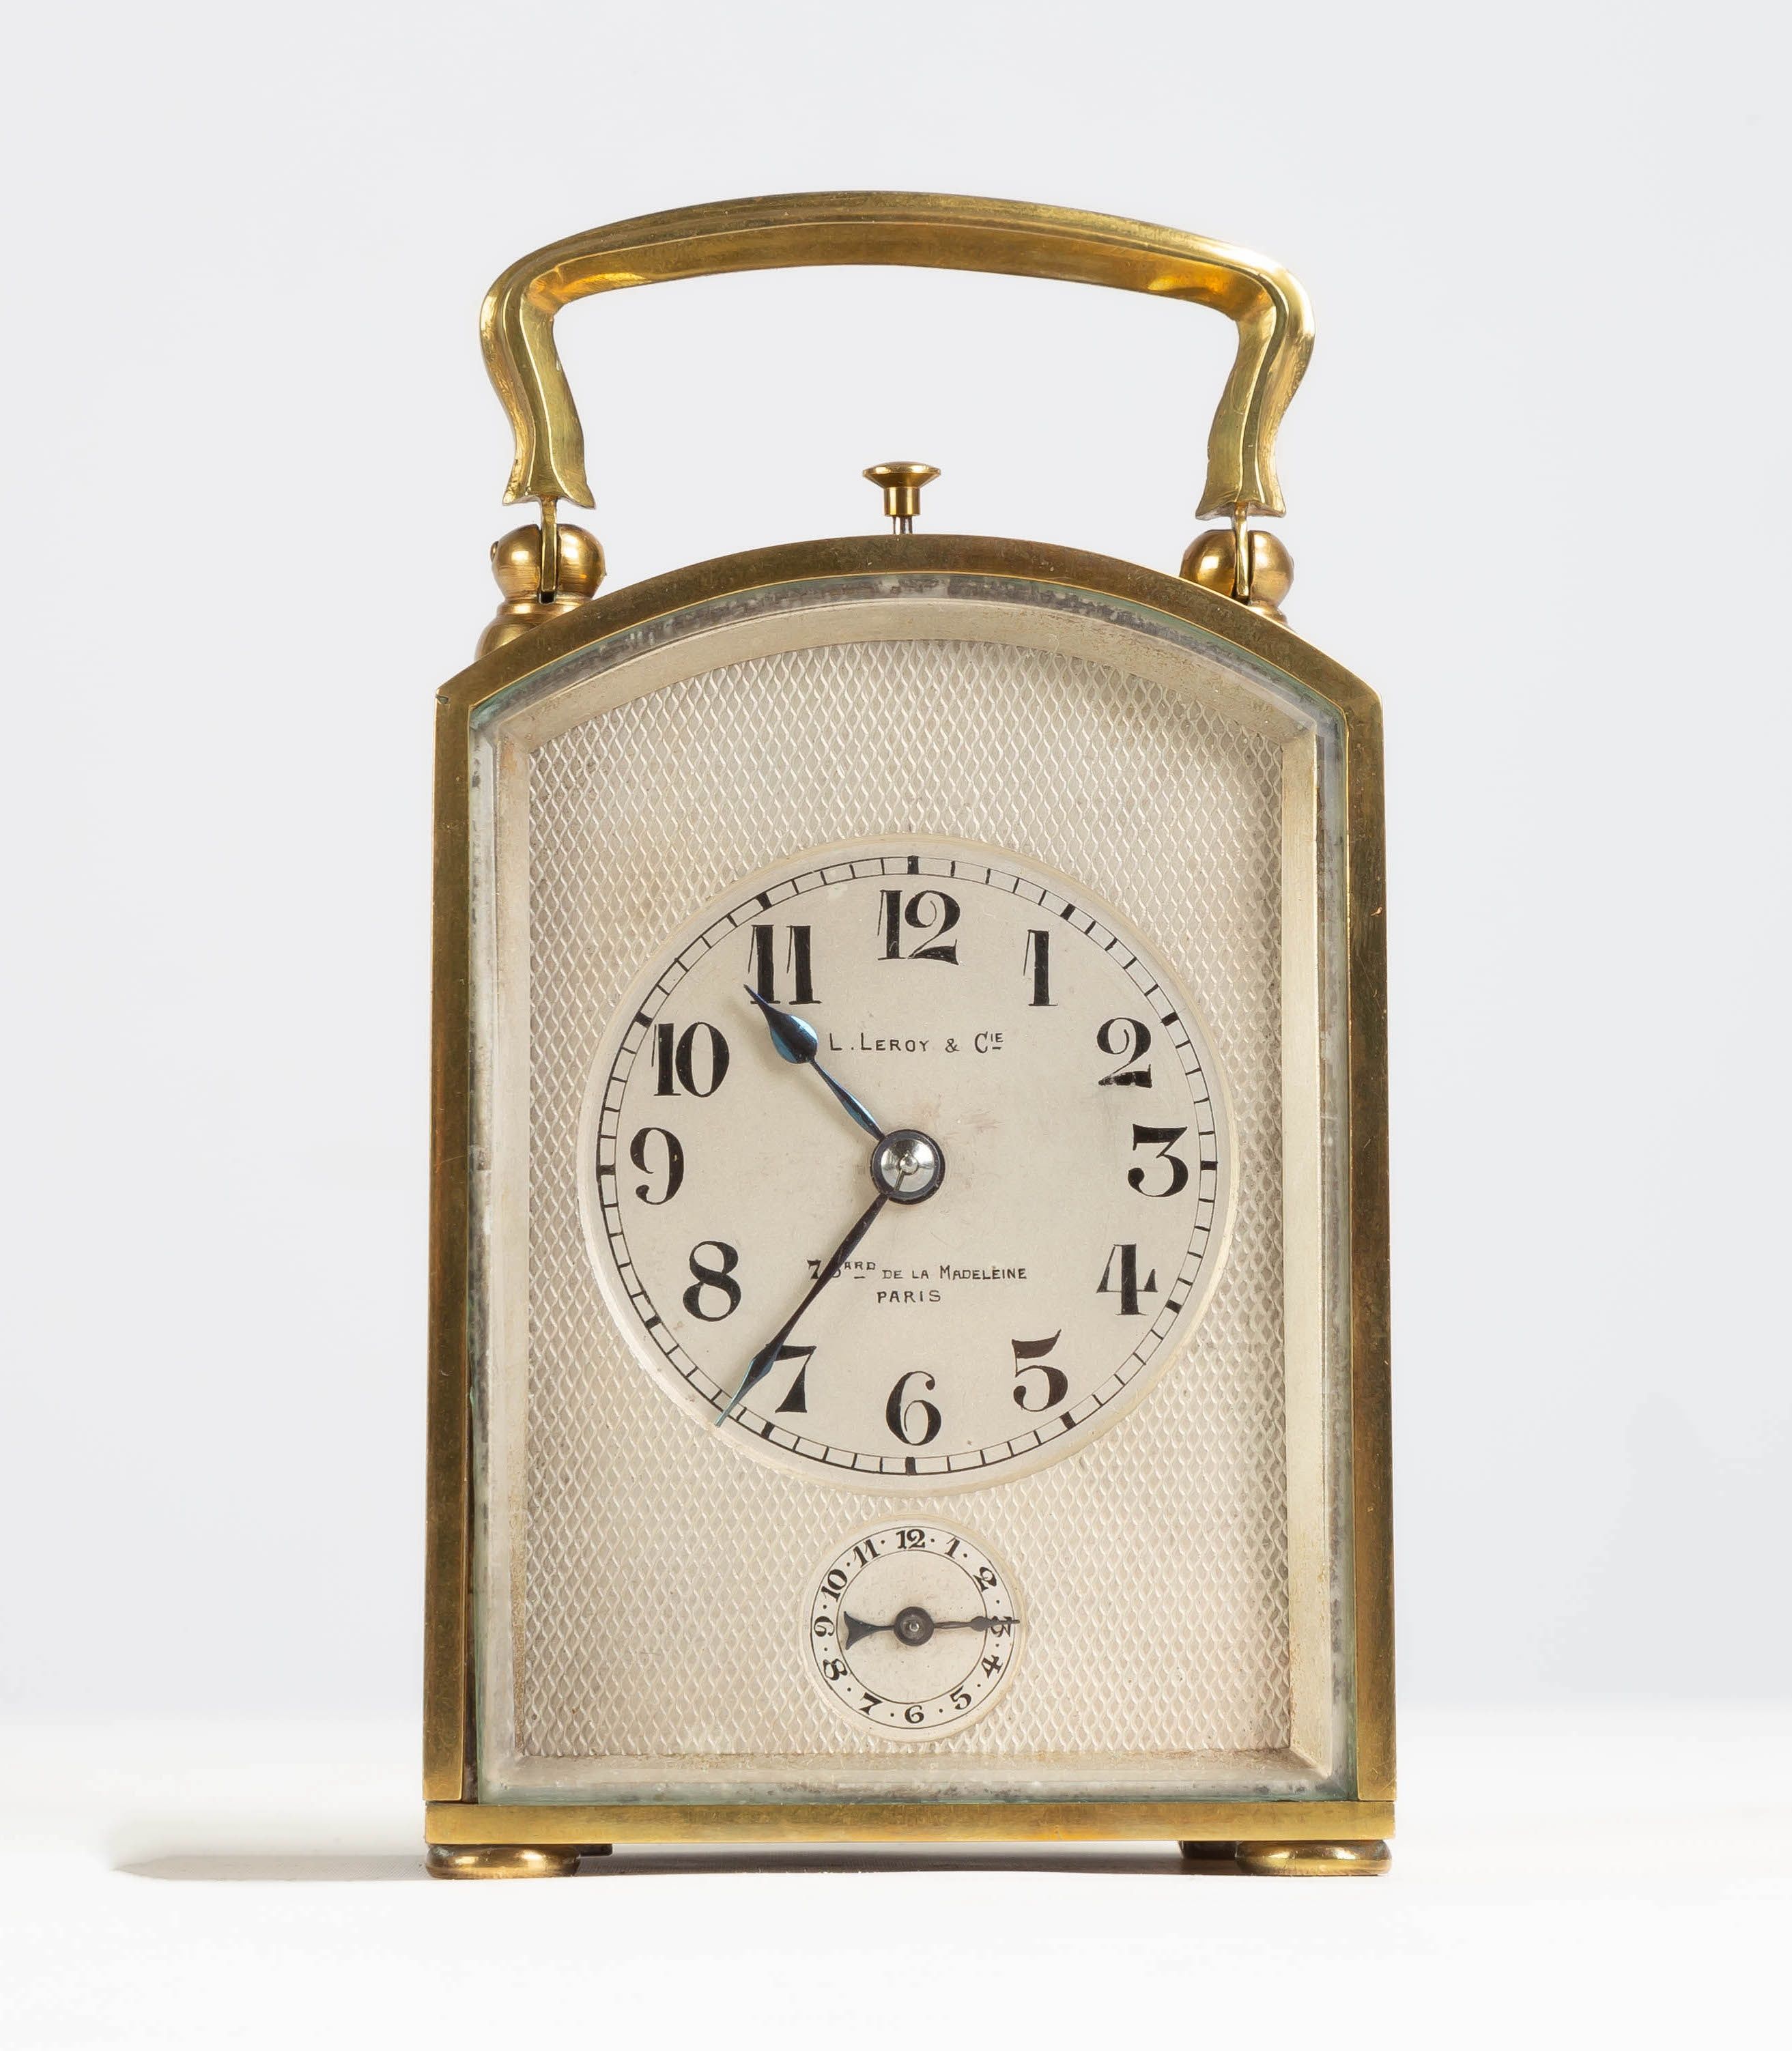 L. Leroy and Cie, Carriage Clock with Repeater, ca. 1900 | Cottone Auctions